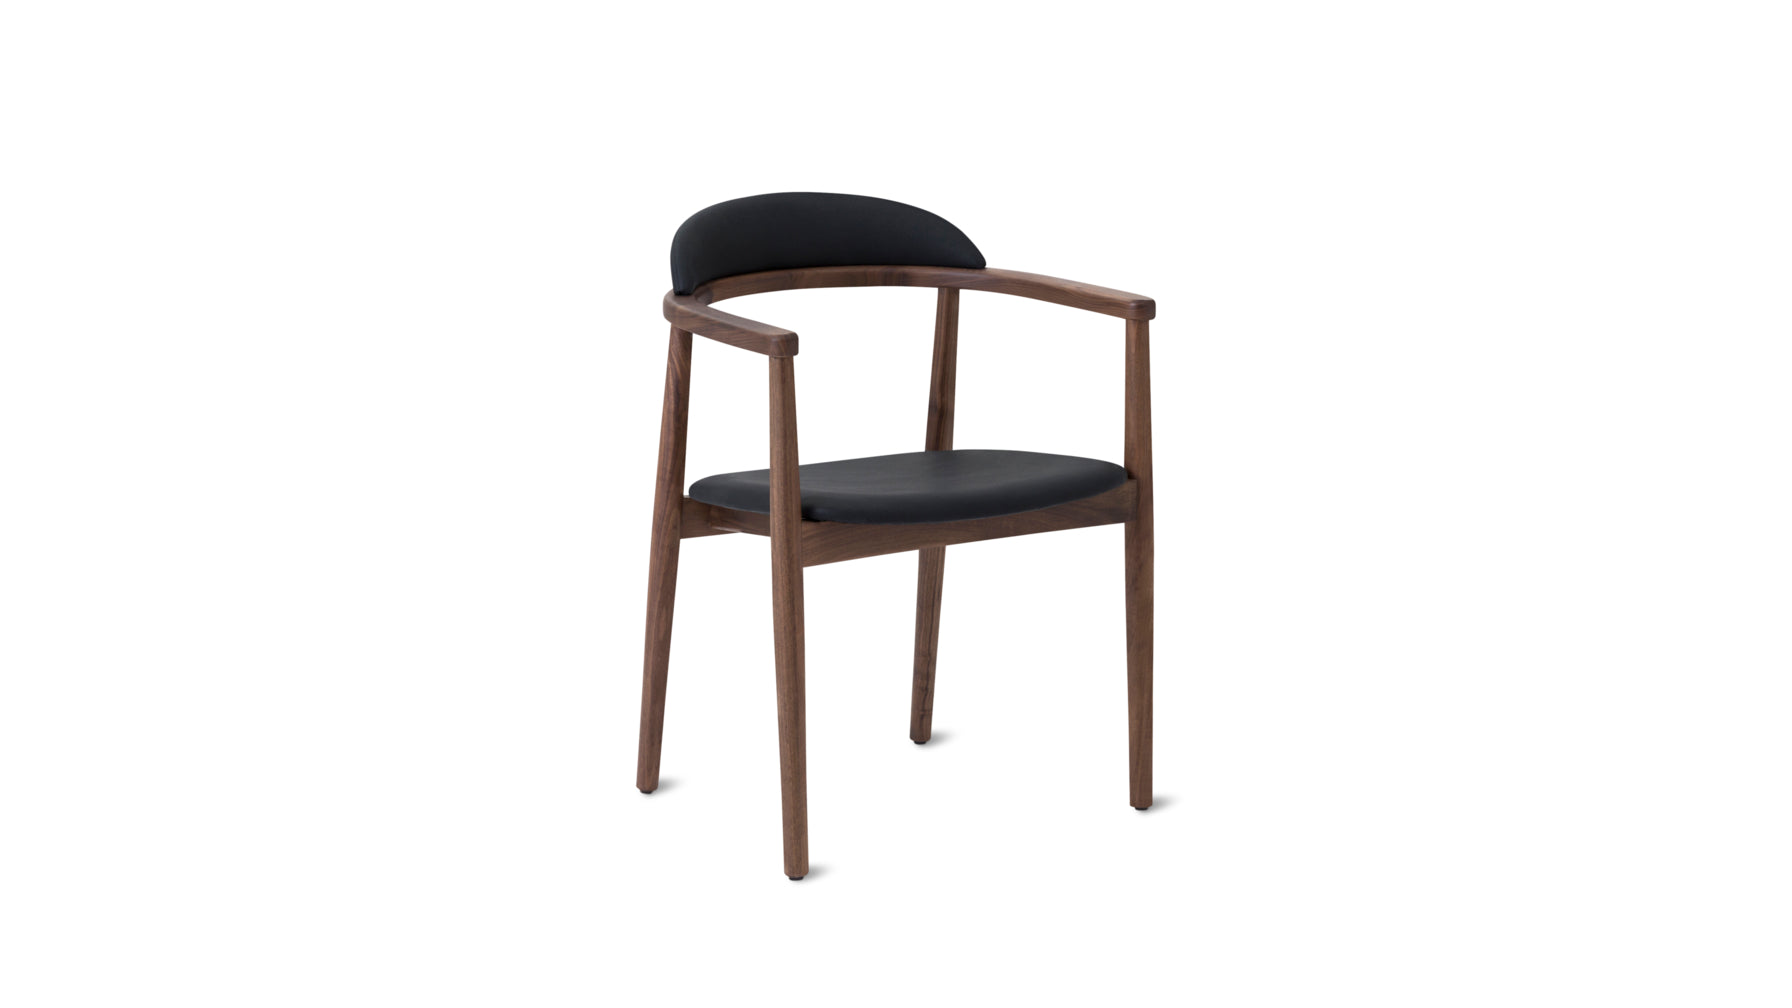 Count On Me Dining Chair, Walnut Black - Image 2